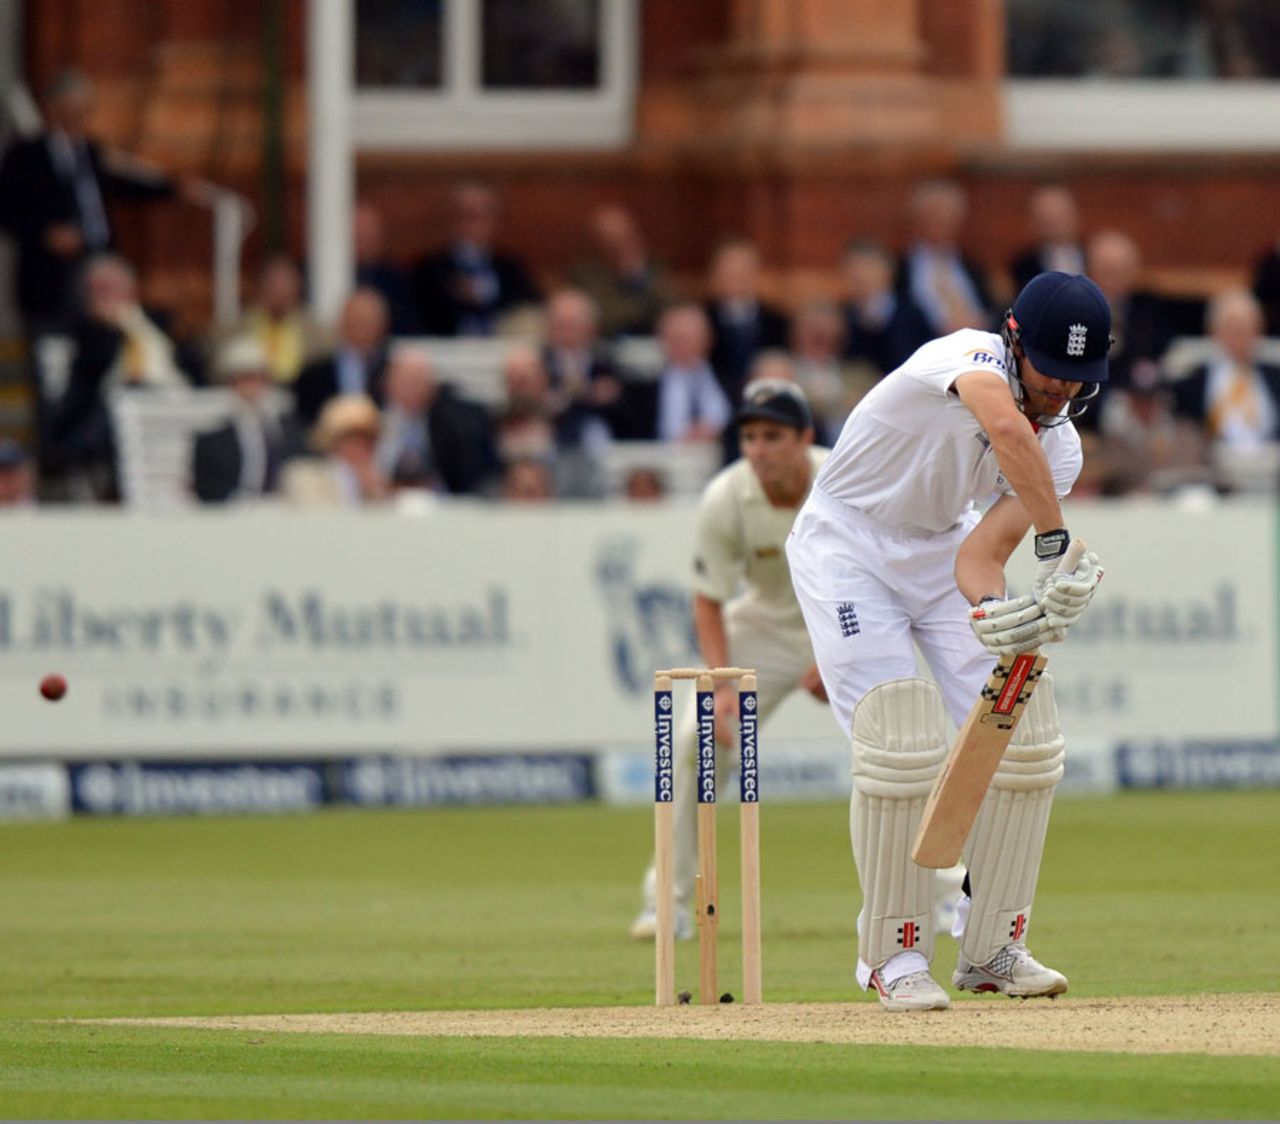 Alastair Cook edges Trent Boult behind, England v New Zealand, 1st Investec Test, Lord's, 1st day, May 16, 2013